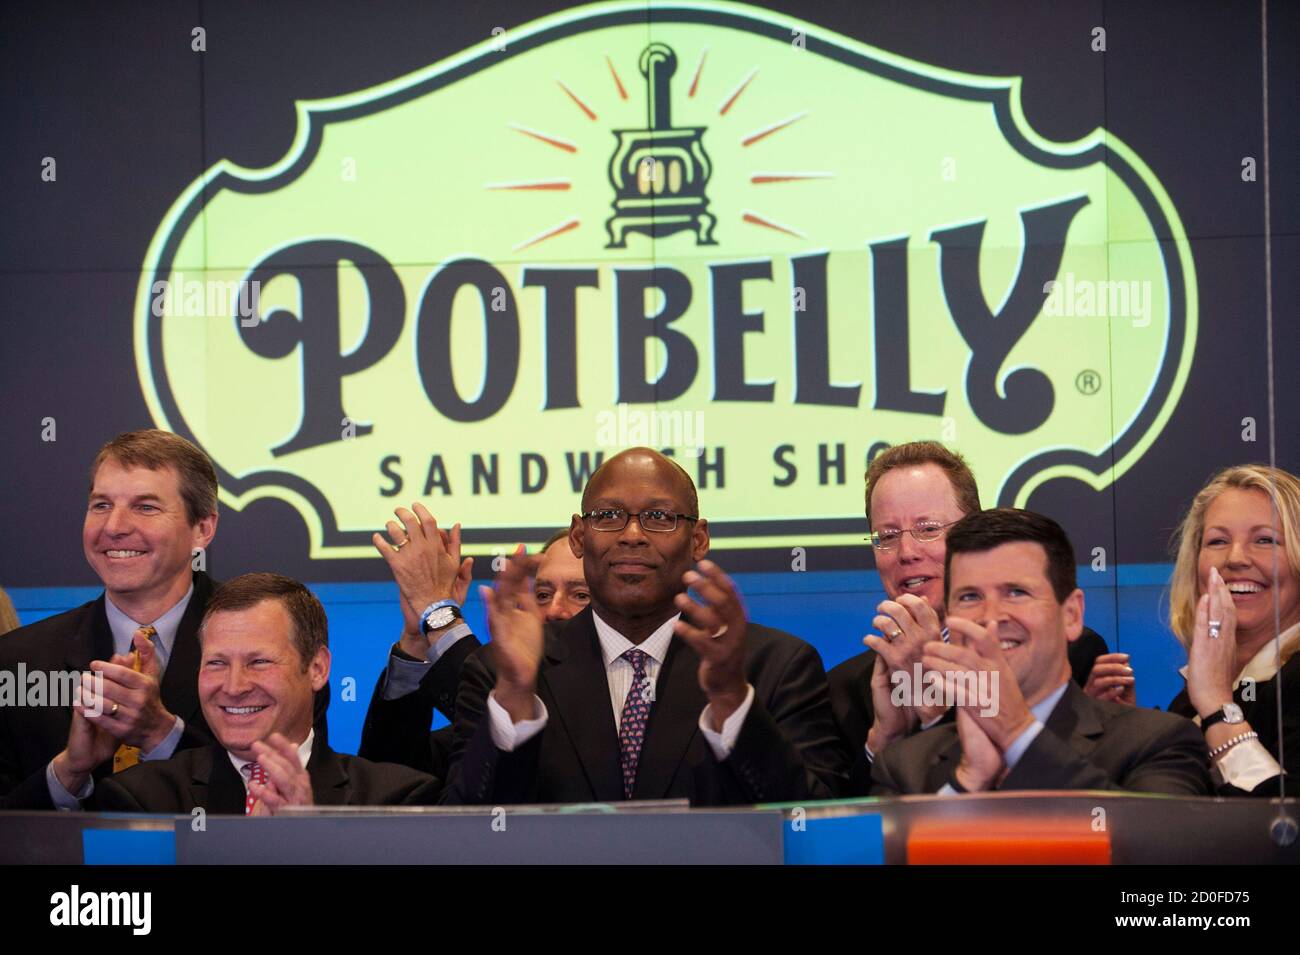 Potbelly sandwiches ipo investment in opportunity act